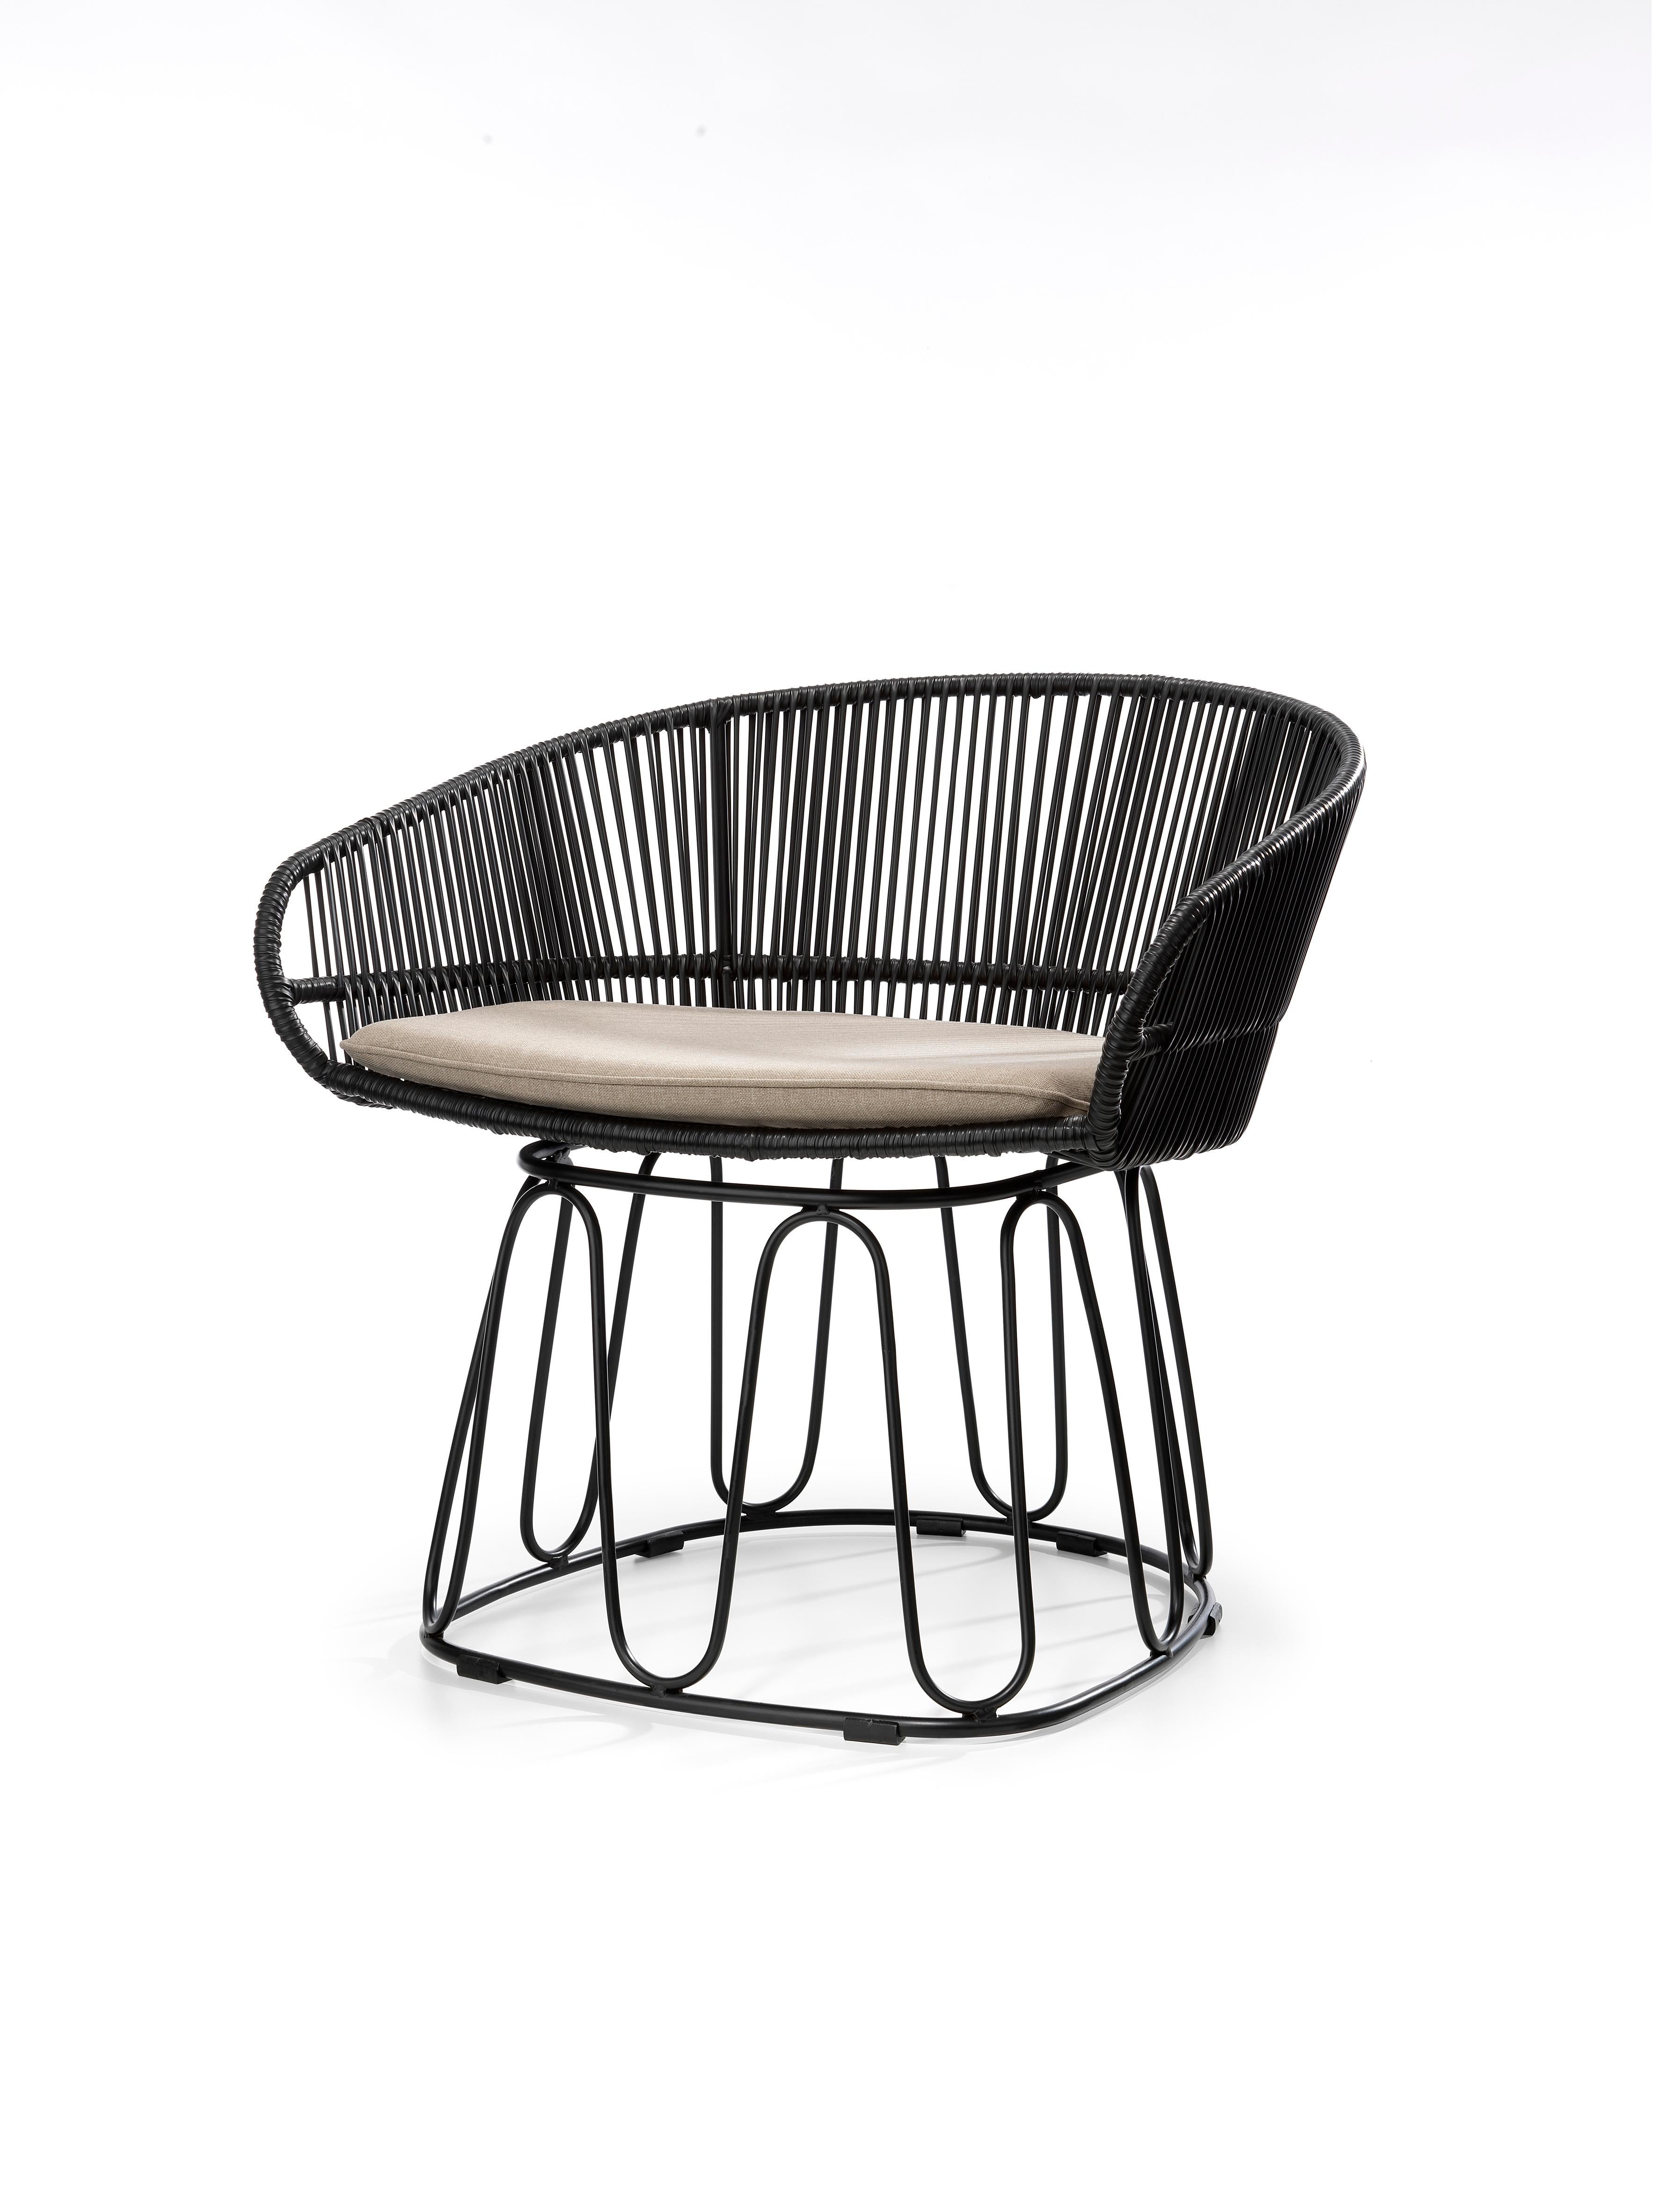 Set of 2 black Circo lounge chair by Sebastian Herkner
Materials: Galvanized and powder-coated tubular steel. PVC strings.
Technique: Made from recycled plastic. Weaved by local craftspeople in Colombia. 
Dimensions: W 74 x D 66.2 x H 73 cm